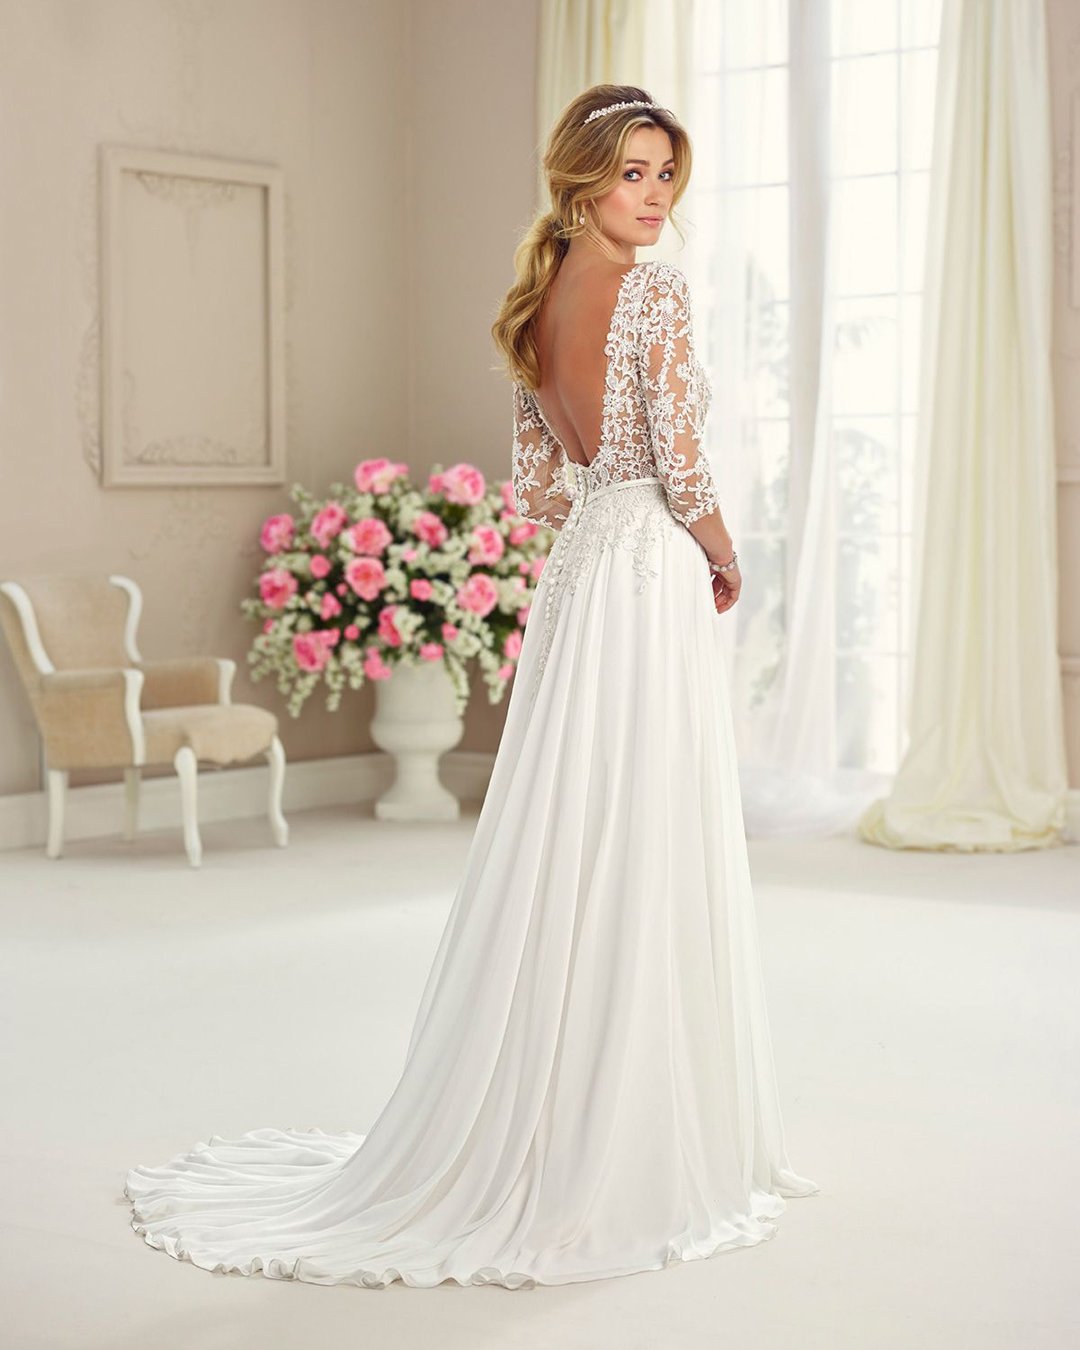 Fall Wedding Dresses With Charm For Fall 2021